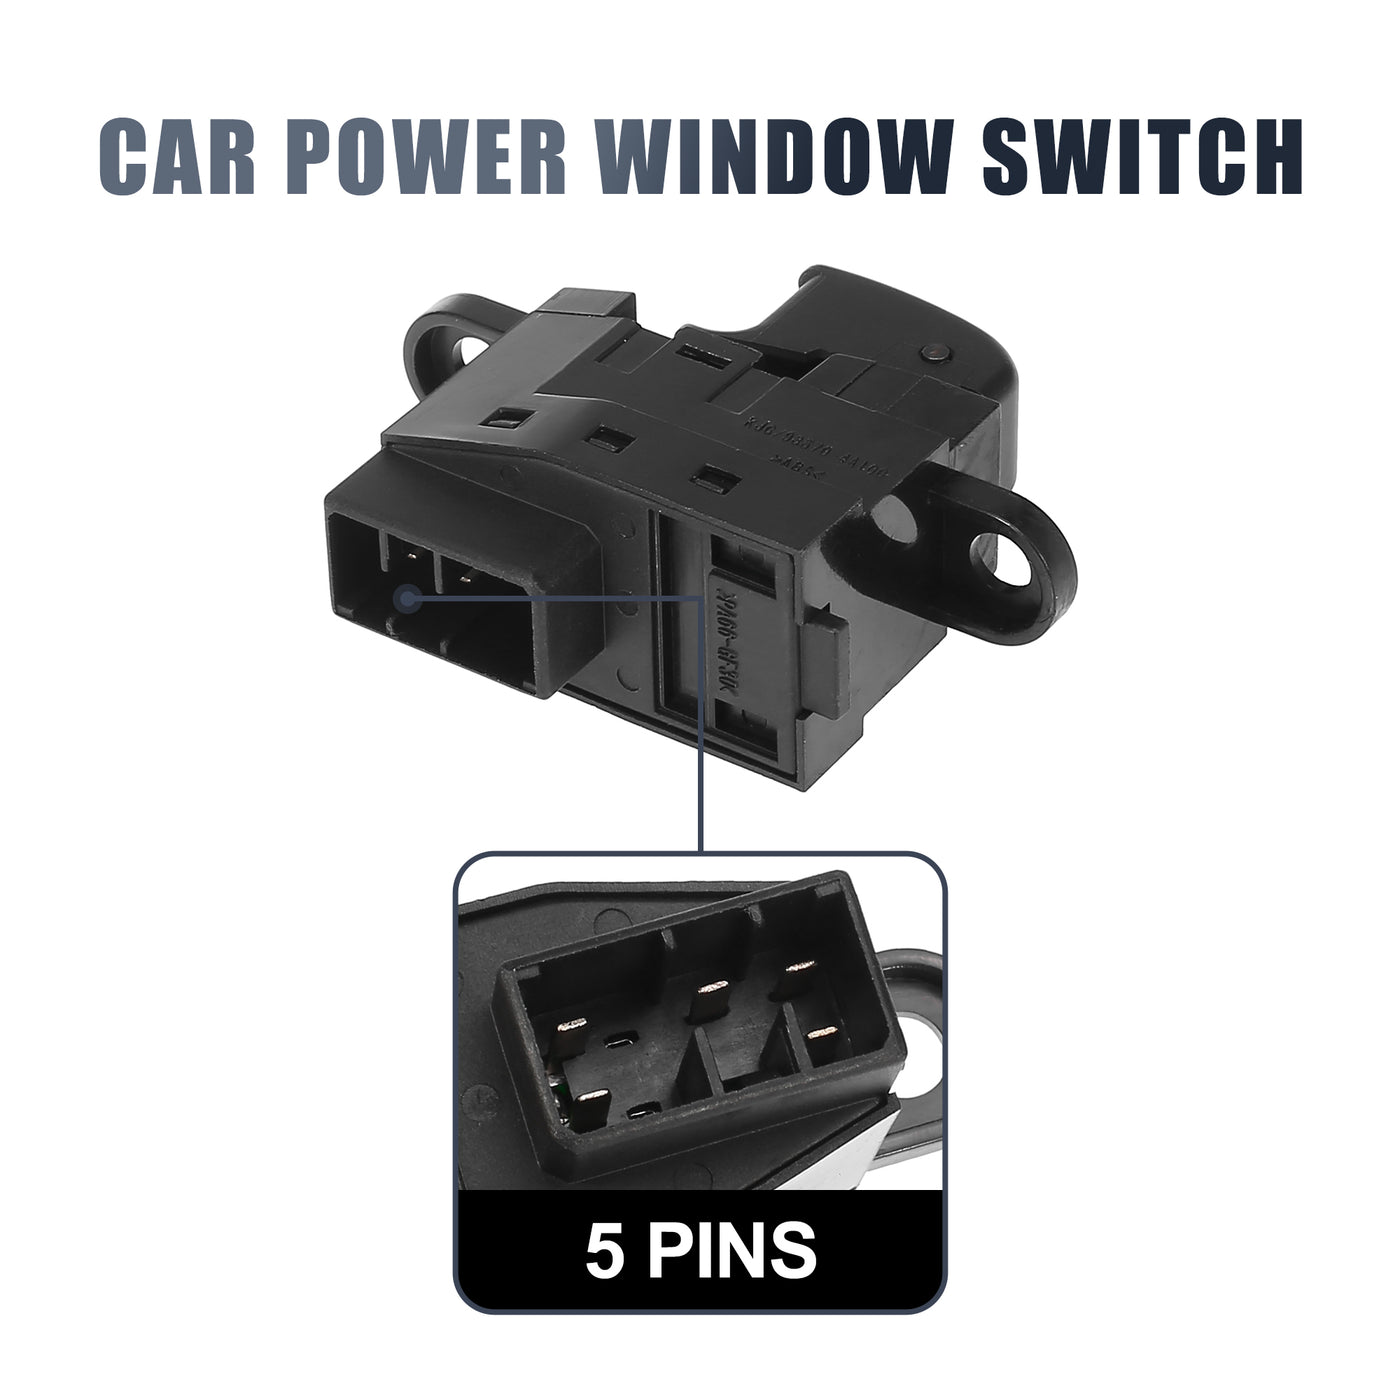 X AUTOHAUX Front Passenger Side Power Window Switch 93580-4A000 Replacement for Hyundai I800 Starex 2001-2006 for Kia